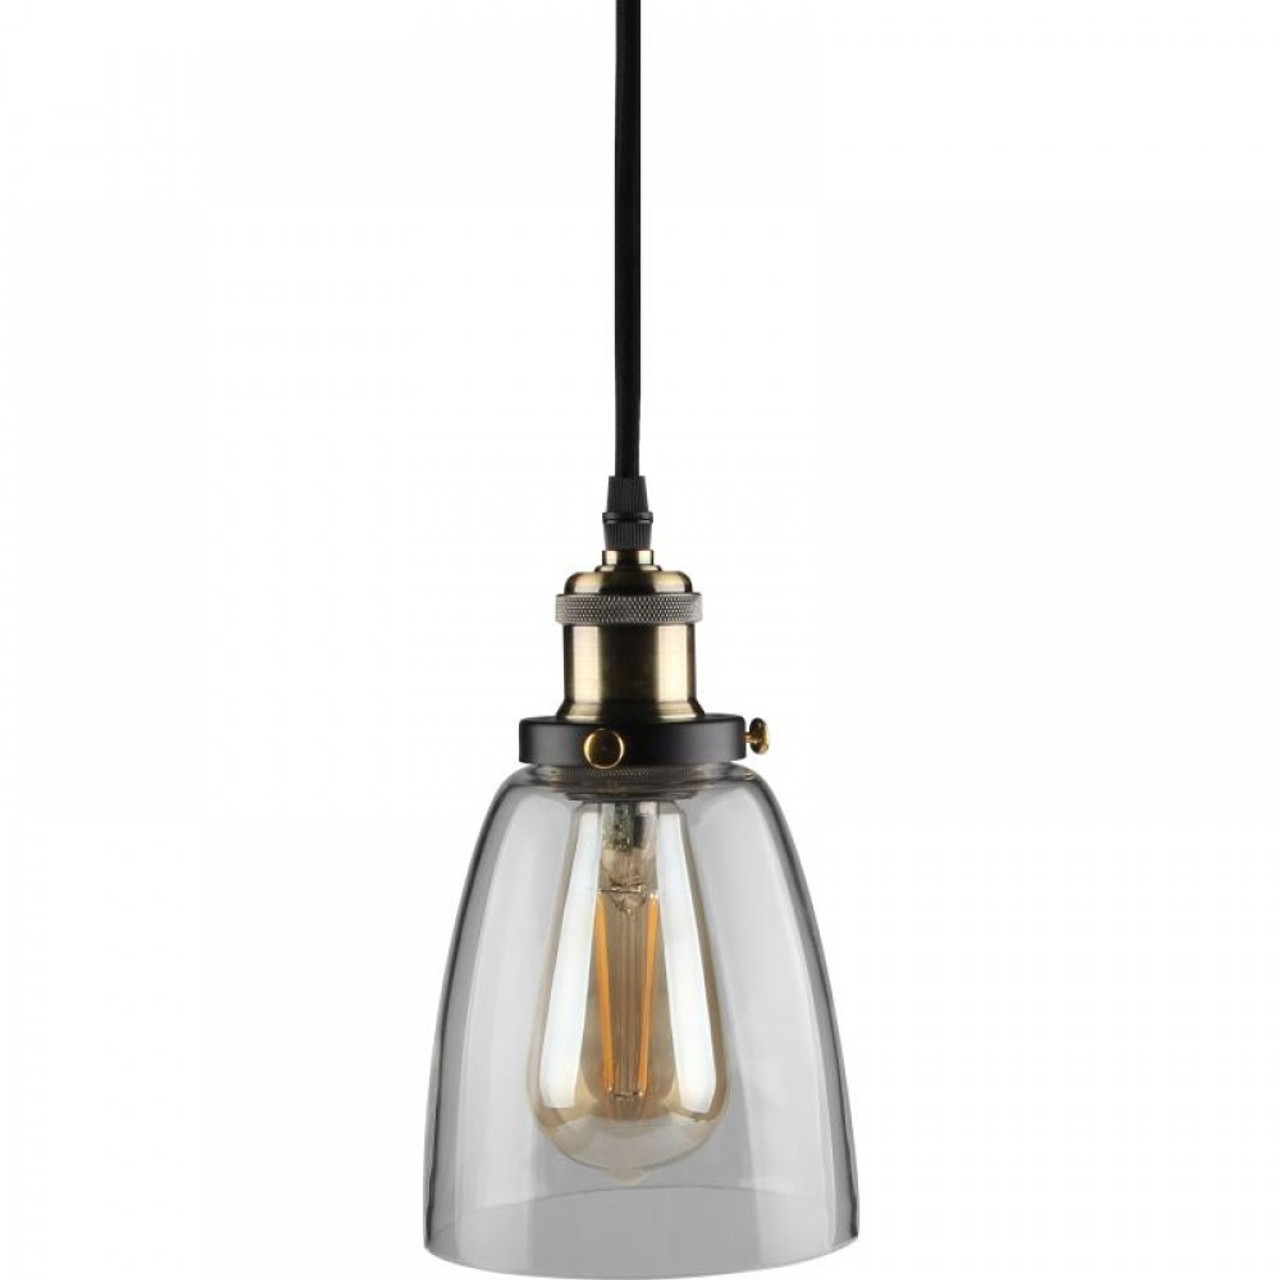 Tulip Cone-shaped Shade Pendant Fitting 220-240V E27 Clear (lamp is not included)